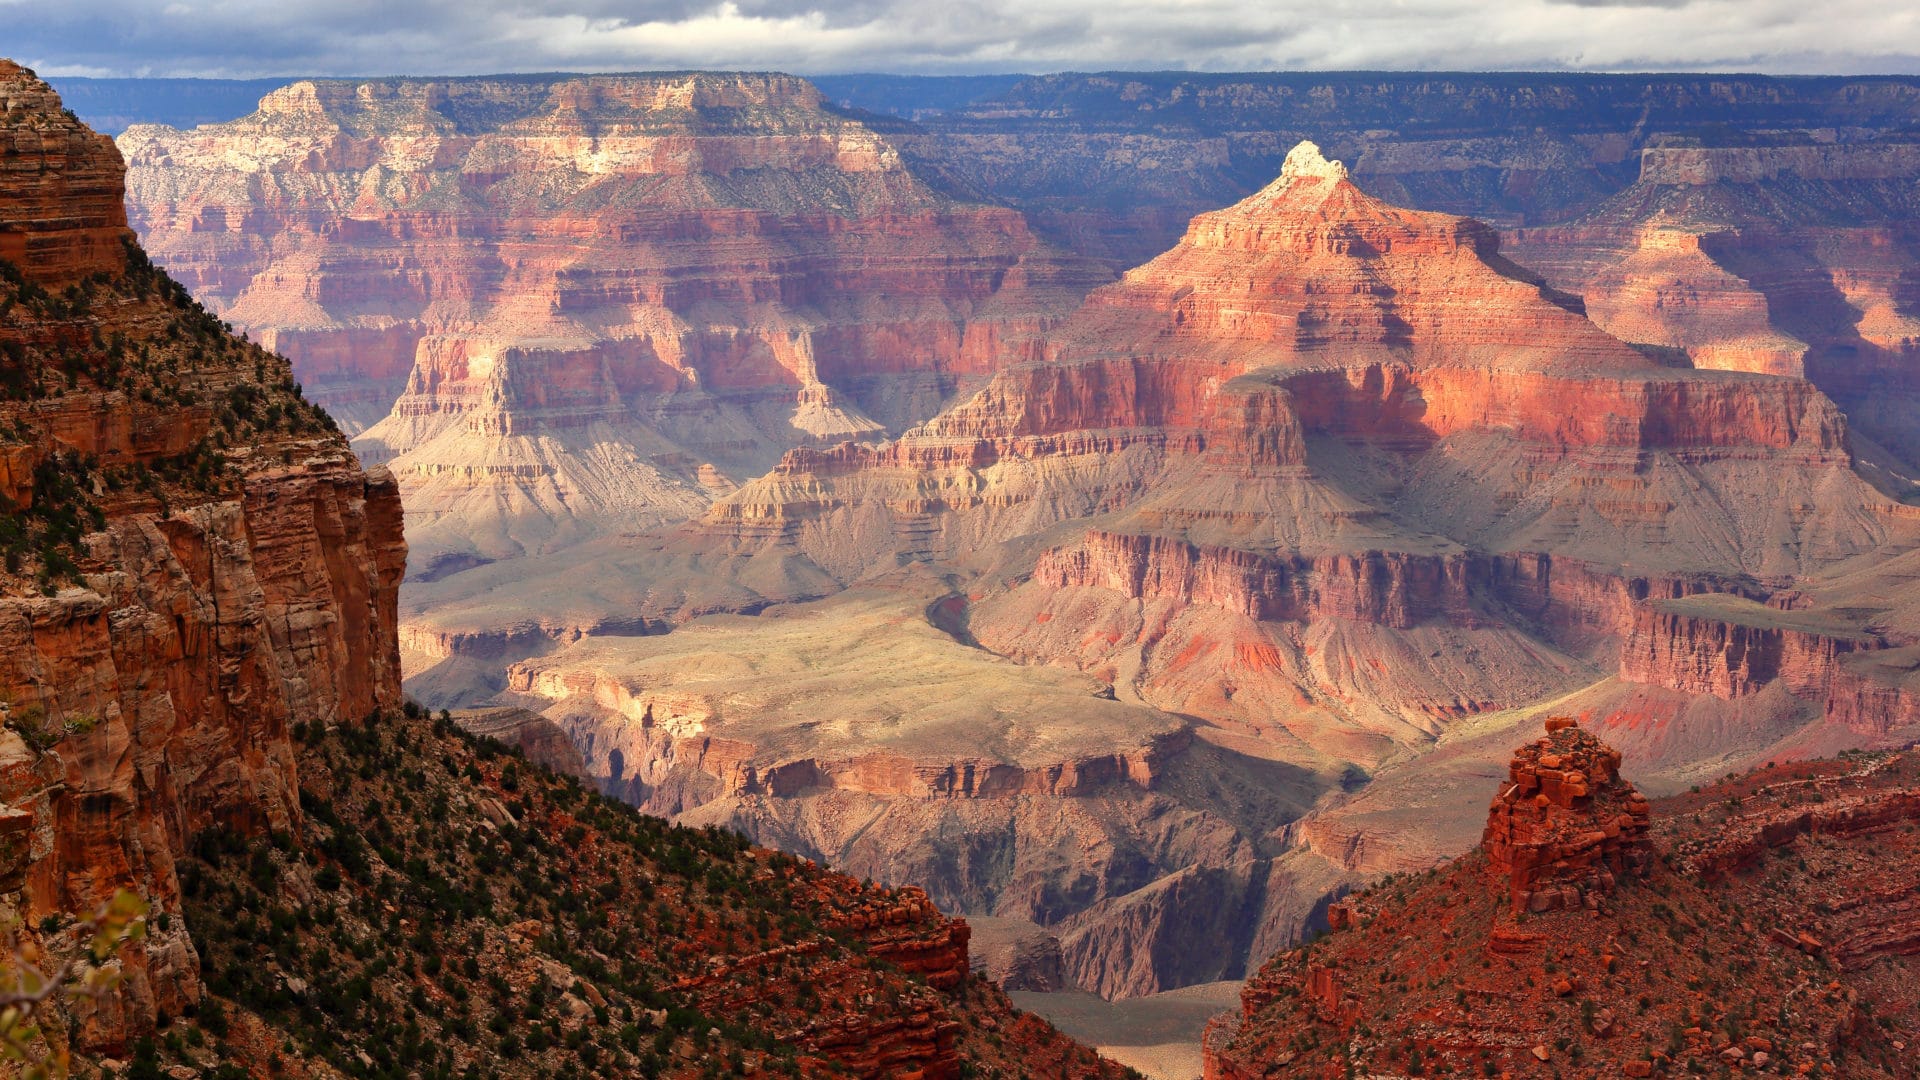 Planning a trip to Grand Canyon National Park